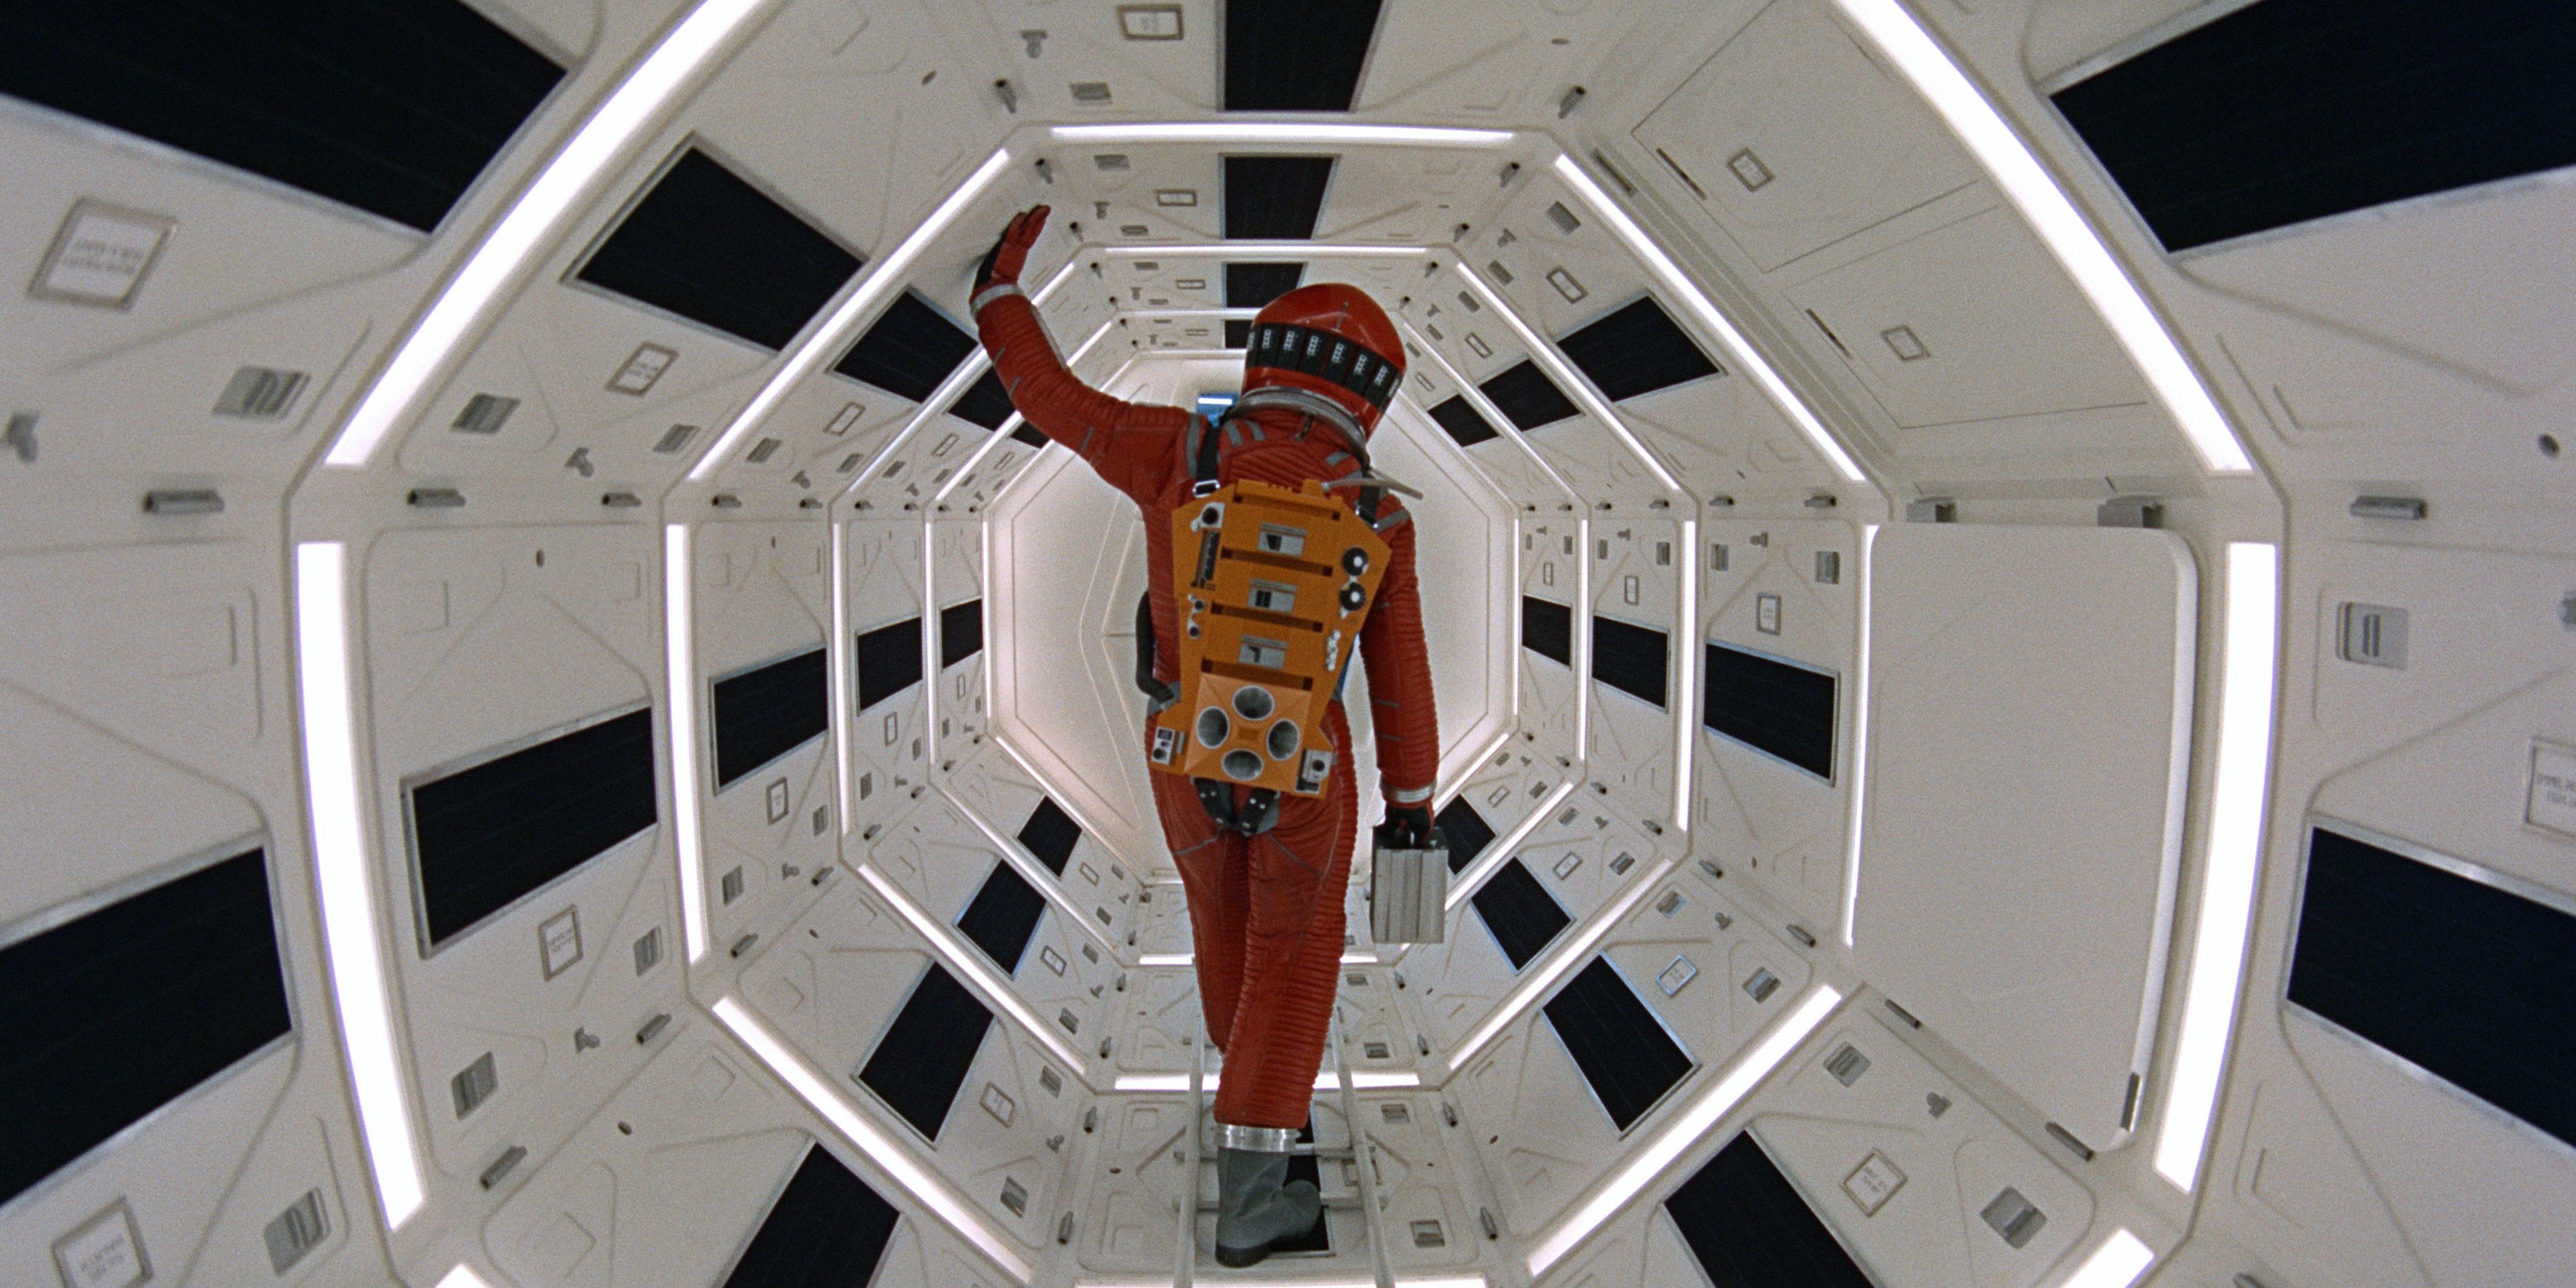 Iconic shot from 2001 A Space Odyssey showing Keir Dullea as an astronaut inside a lit spaceship